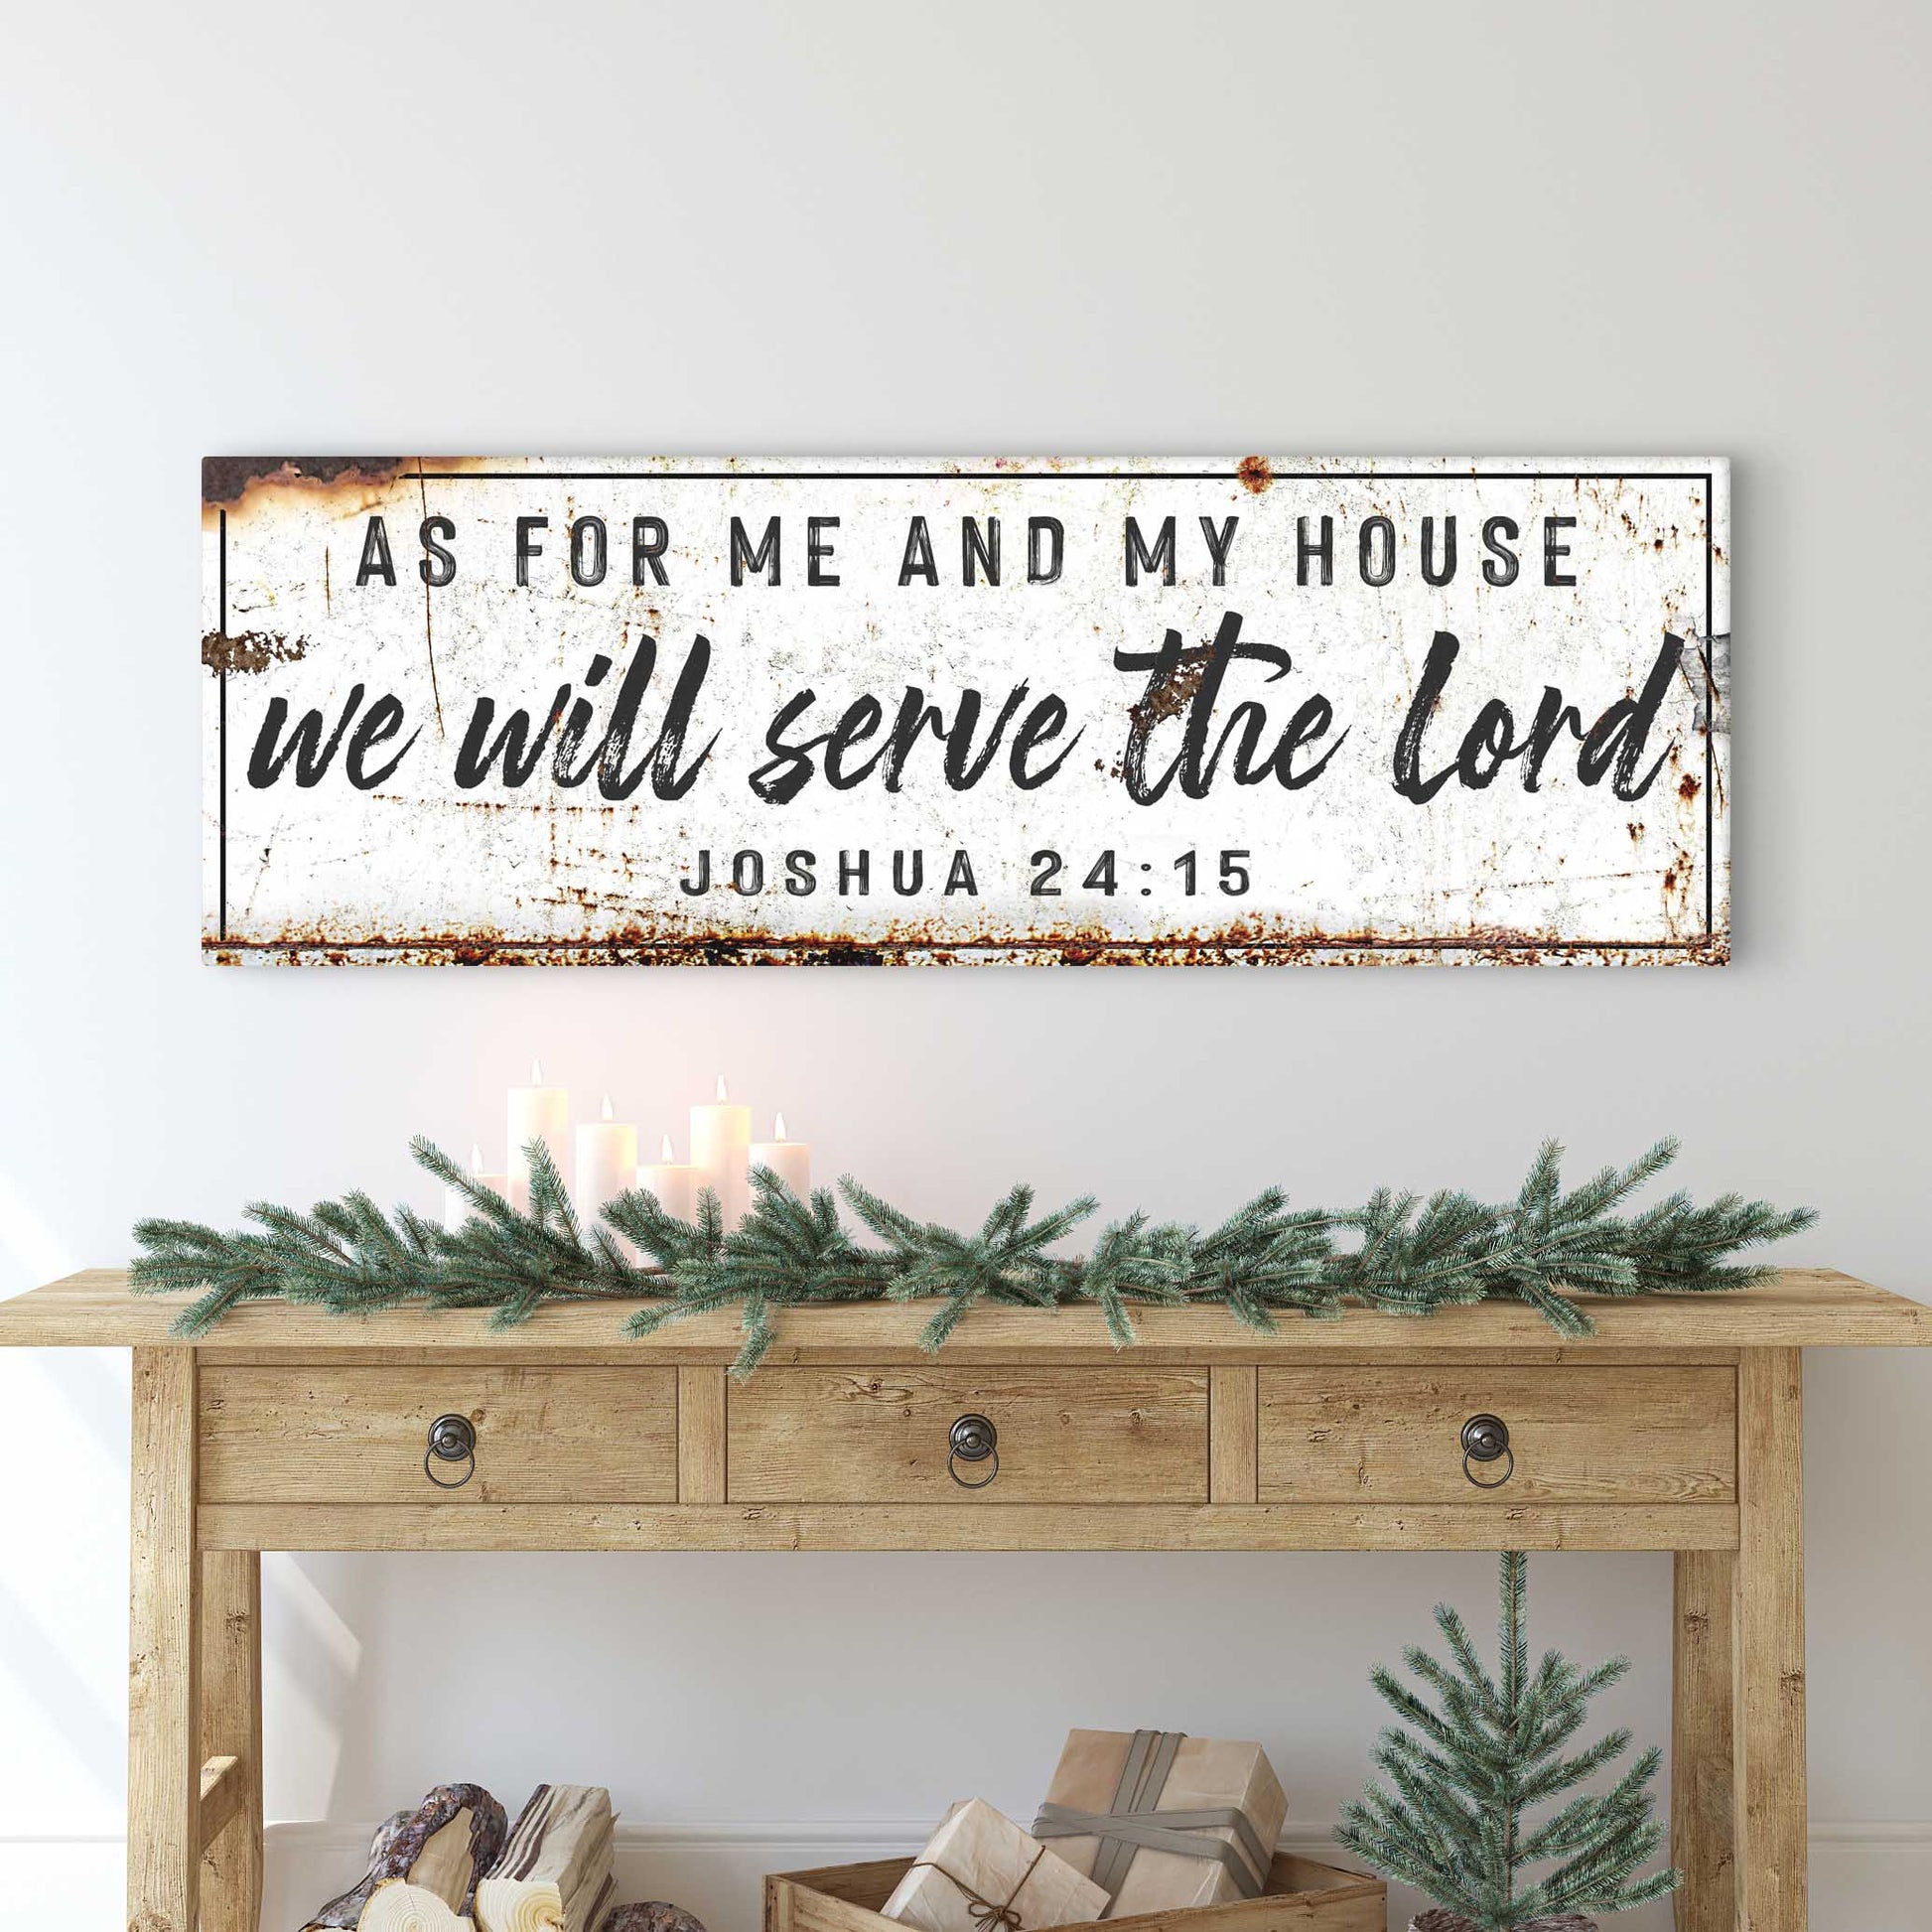 We Will Serve The Lord Rustic Sign - Image by Tailored Canvases